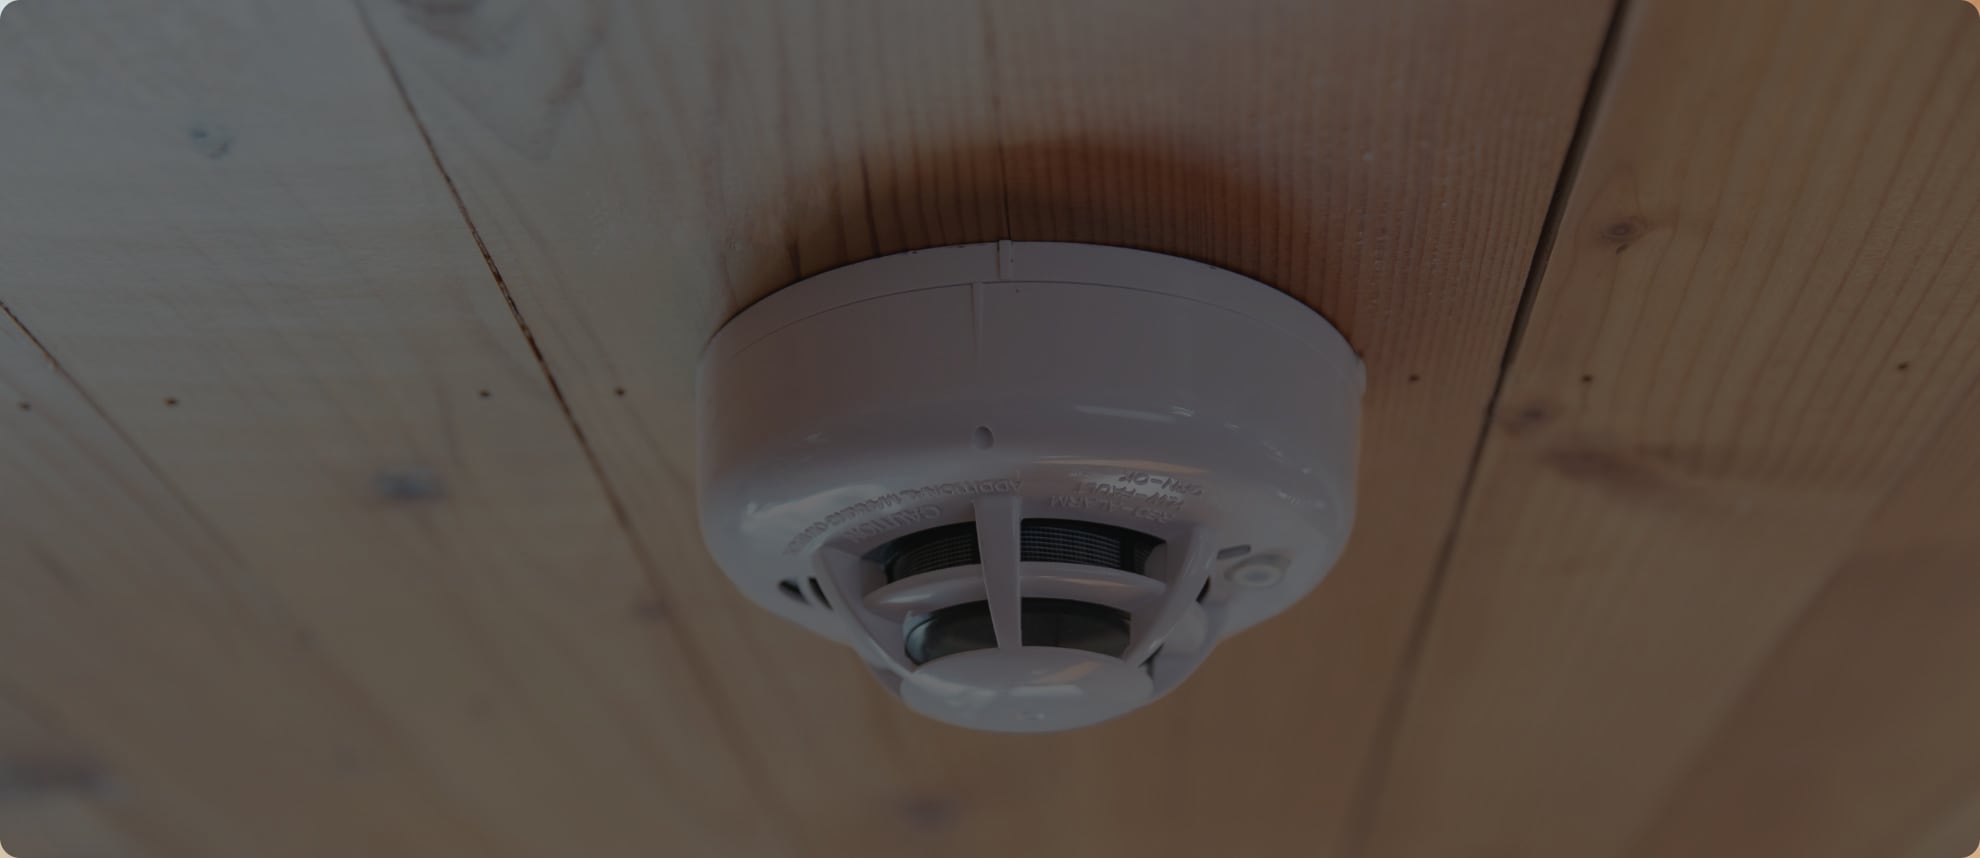 Vivint Monitored Smoke Alarm in Fort Collins